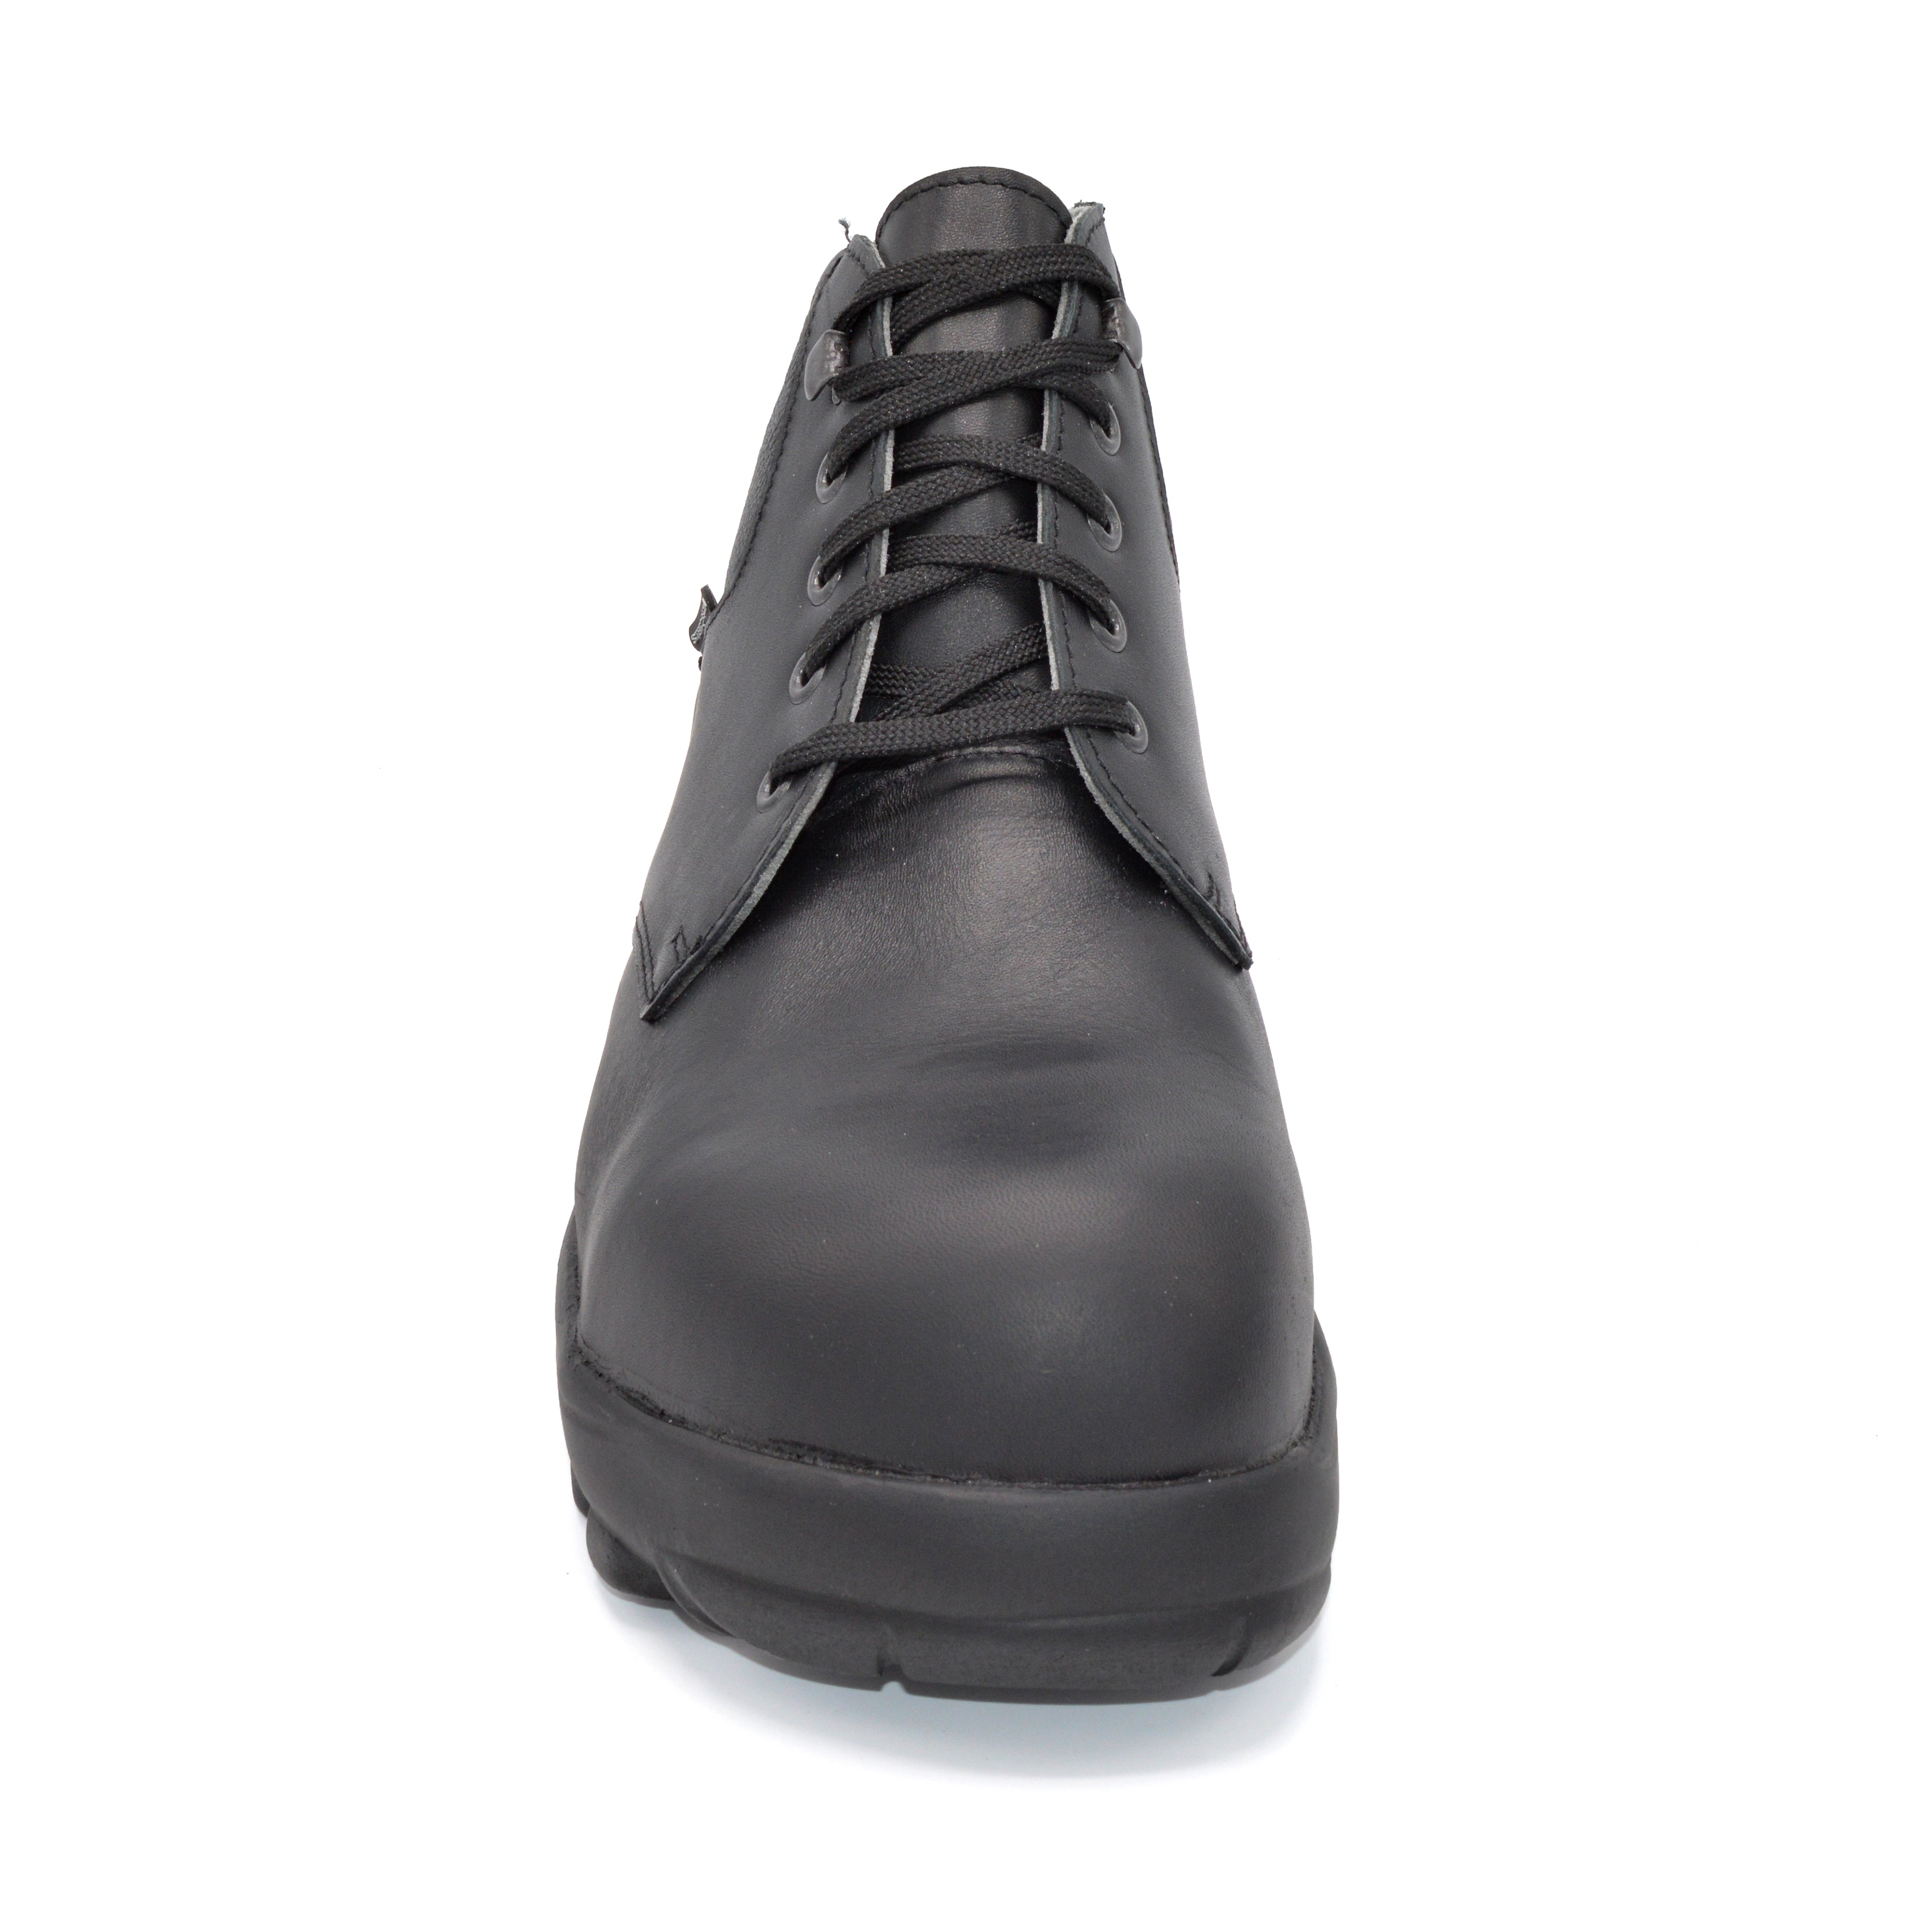 Black Lace-up Work Boot For Bunions